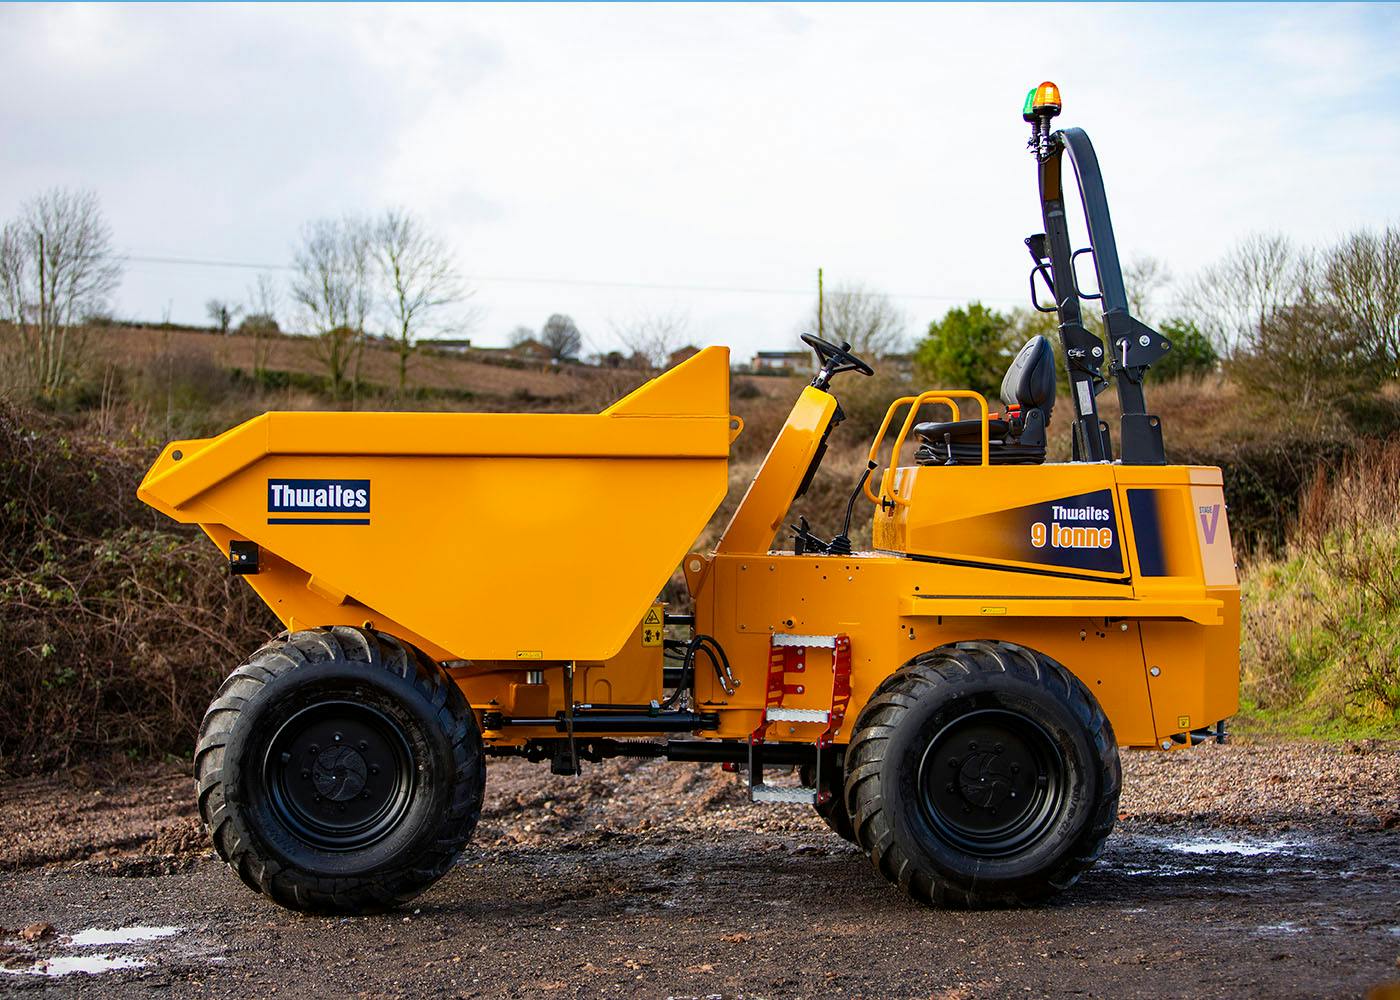 Image of Thwaites Dumpers Decals Focus on Extended Outdoor Life and Branding